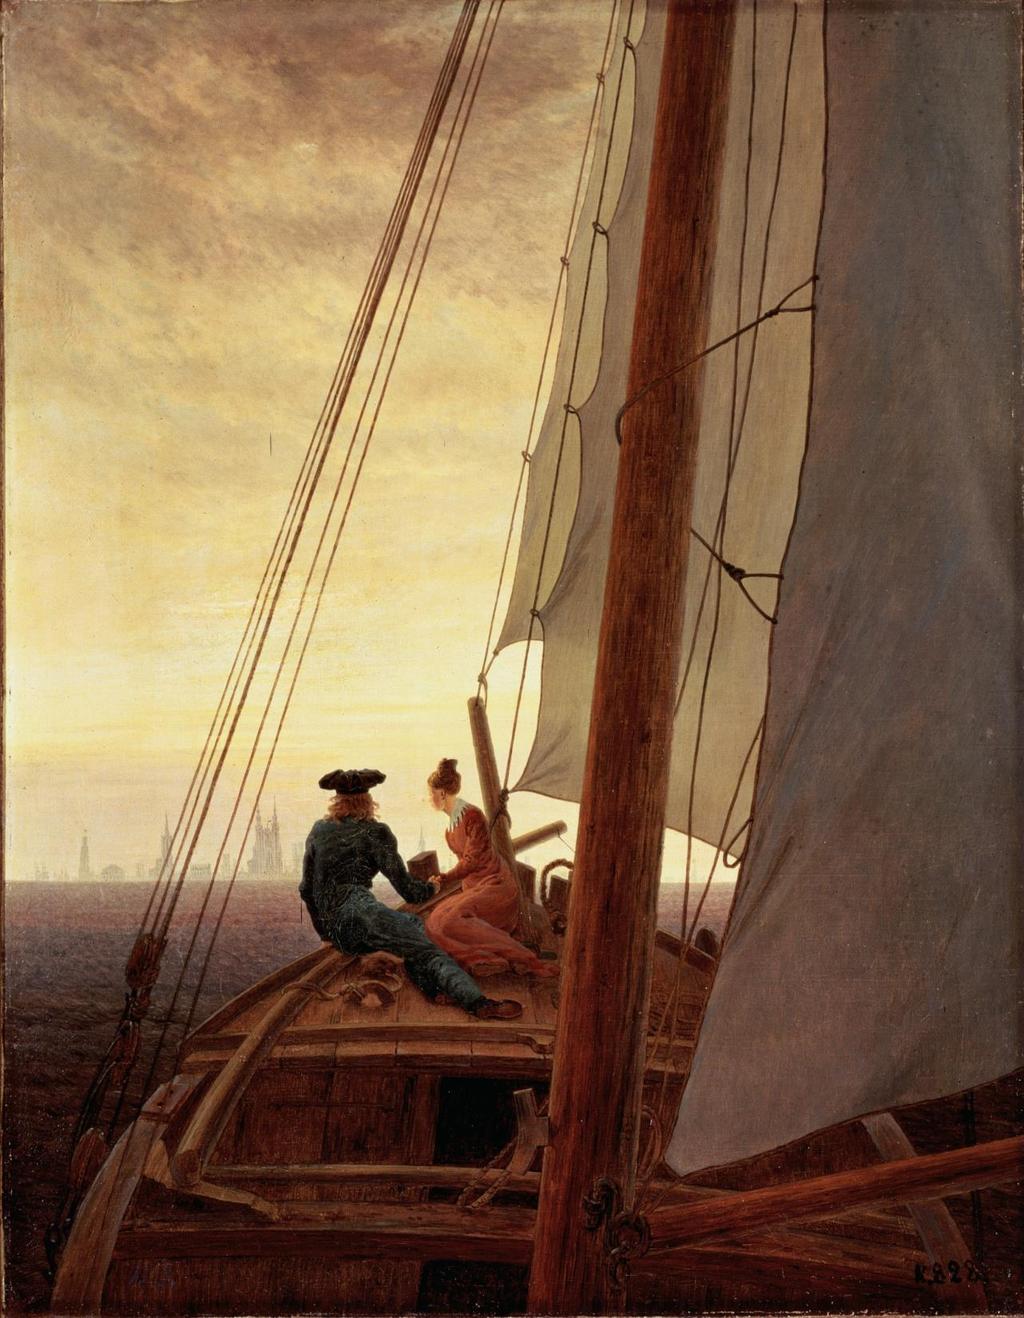 On the Sailboat 1820